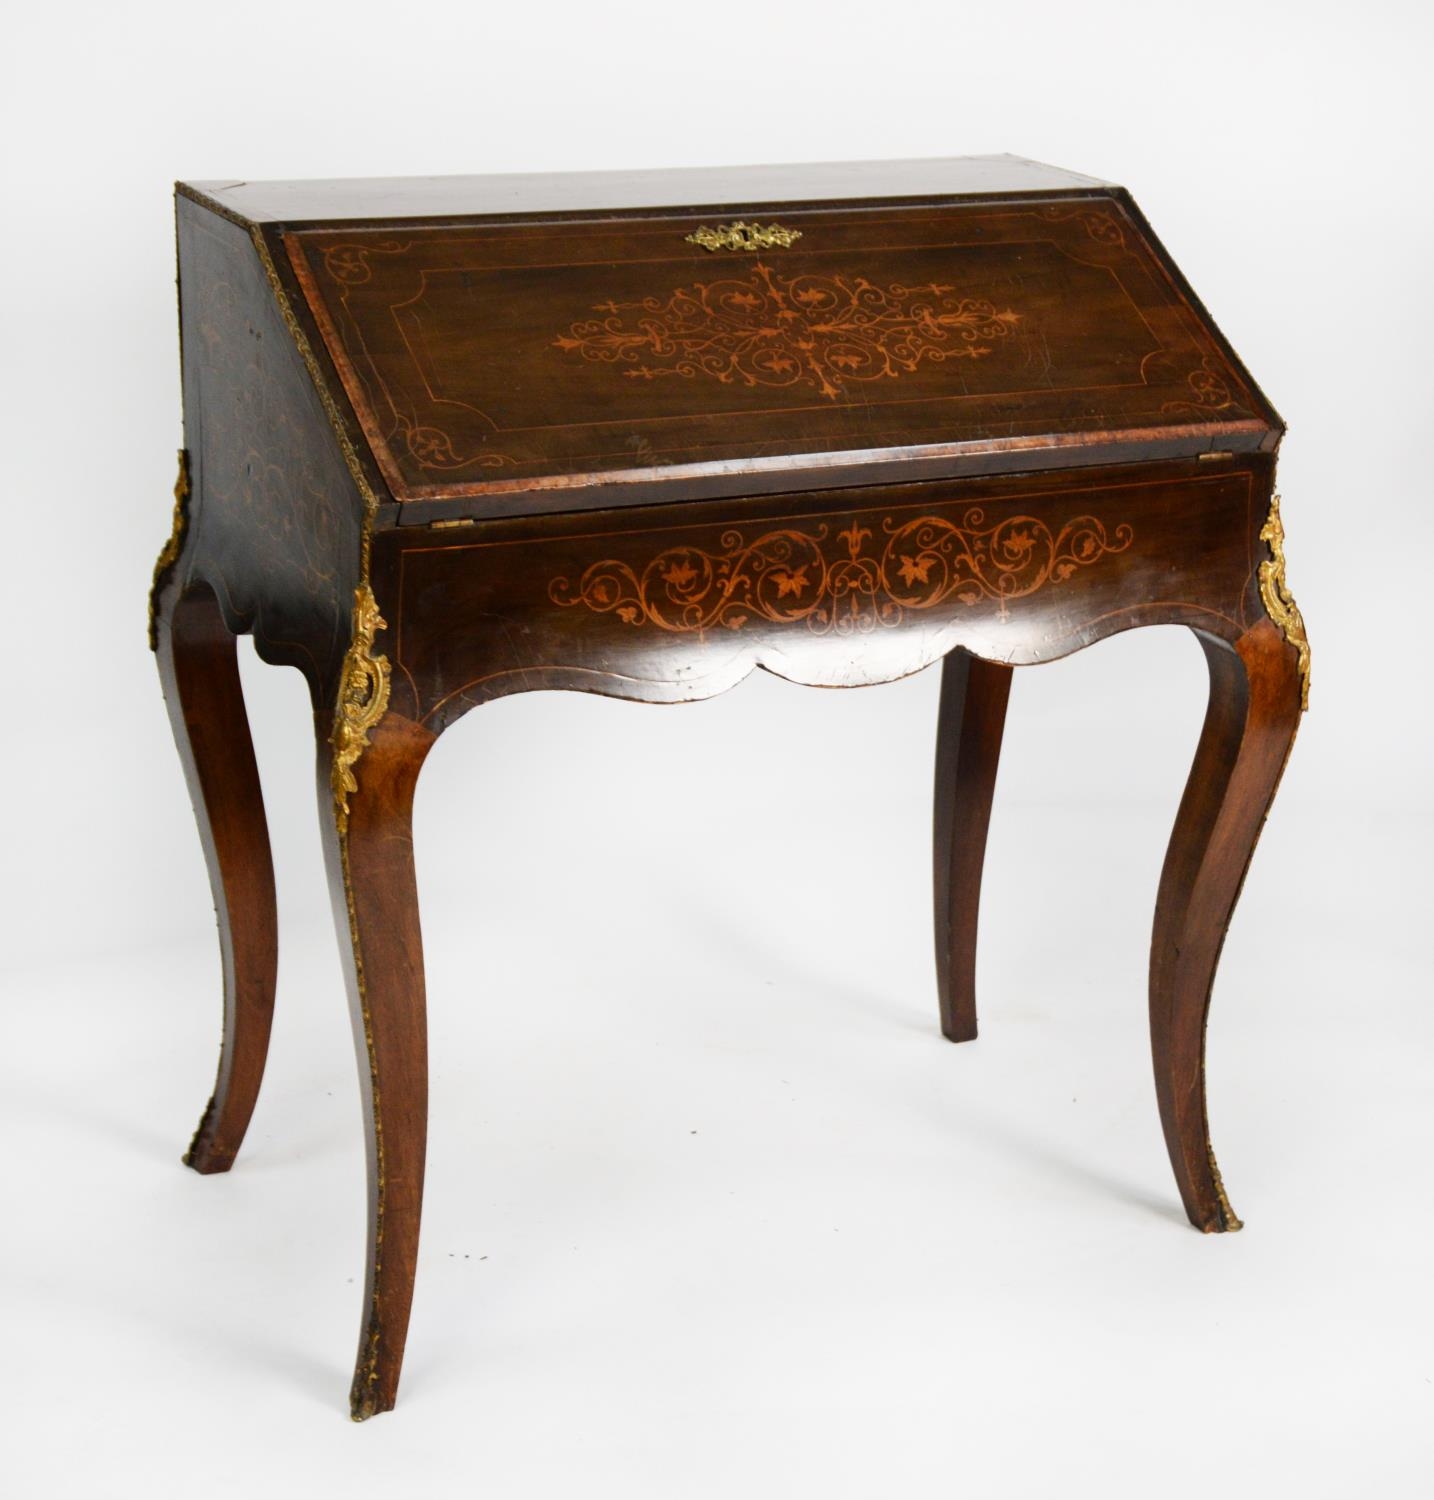 LATE NINETEENTH CENTURY GILT METAL MOUNTED AND INLAID KINGWOOD BUREAU DE DAME, of typical for the - Image 6 of 6